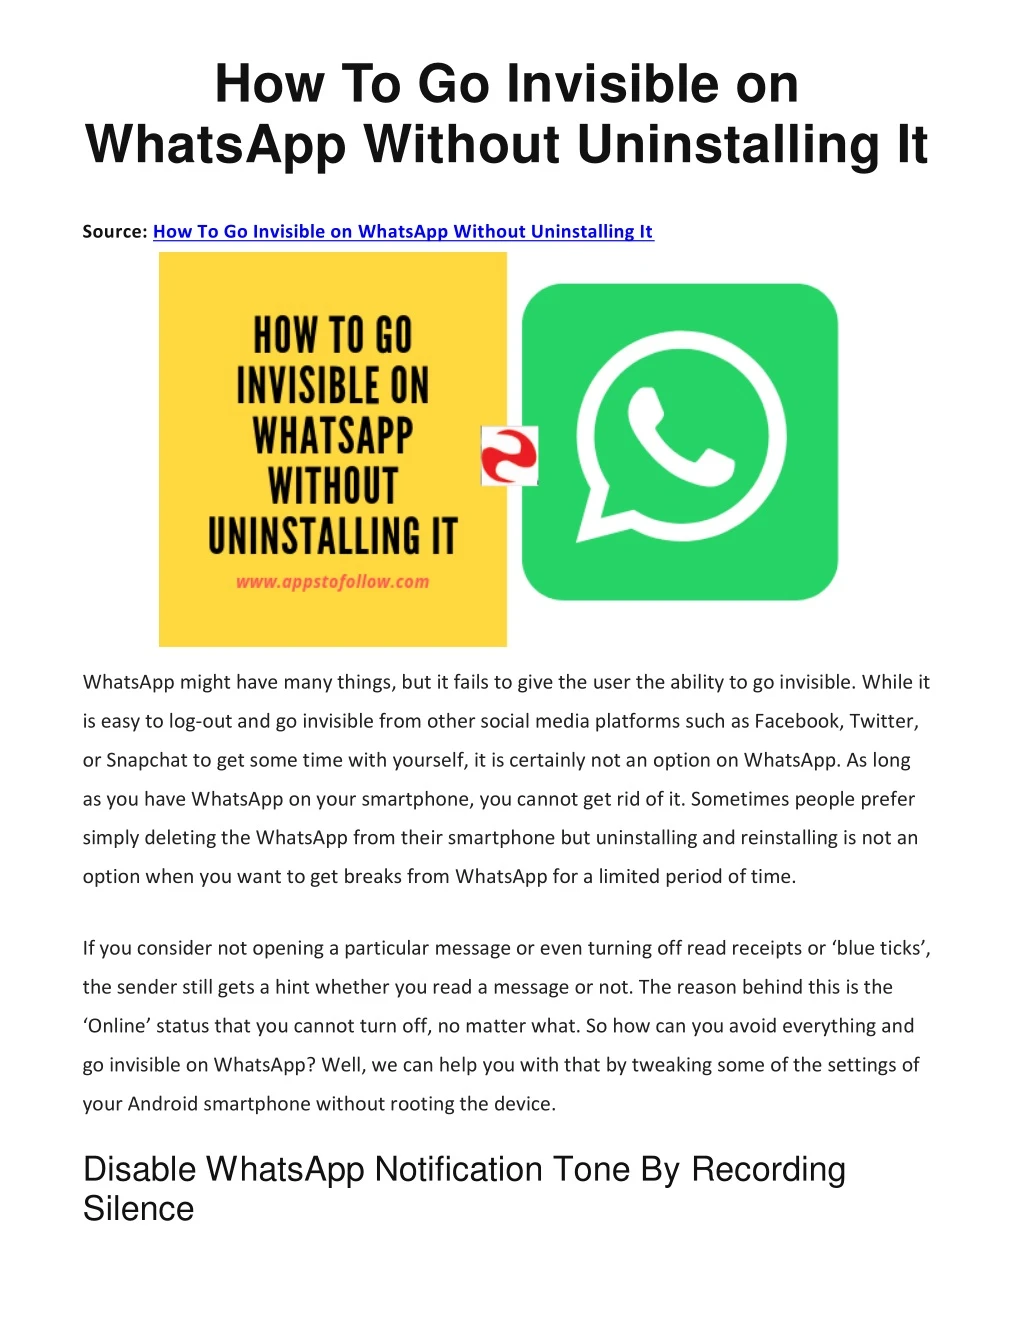 how to go invisible on whatsapp without